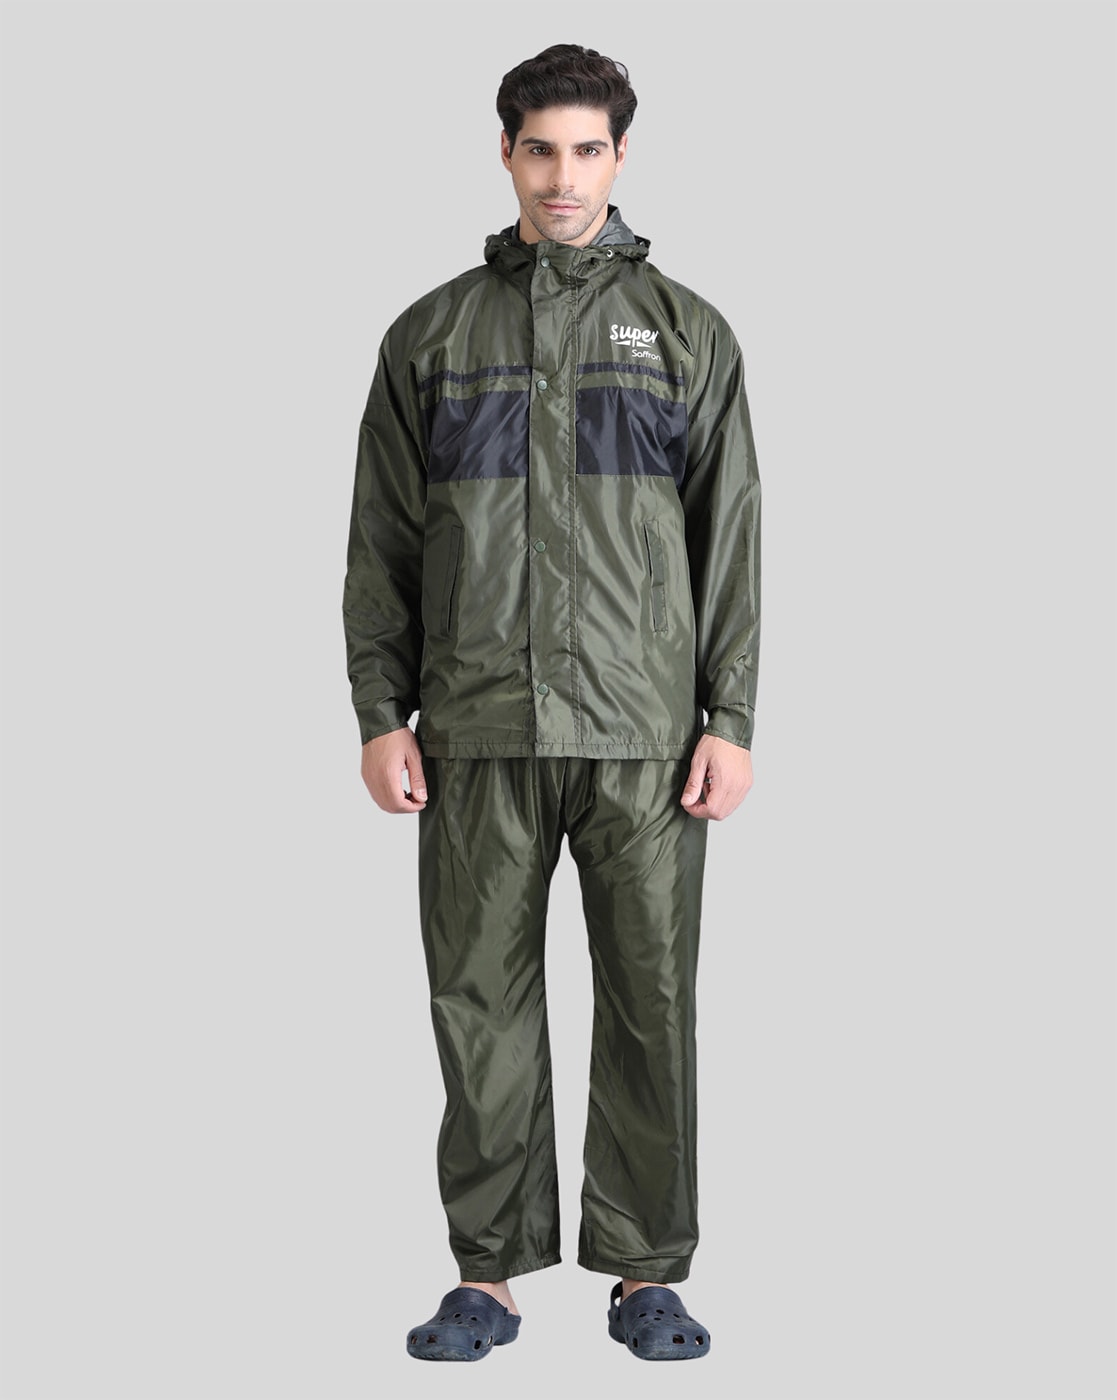 Navis Marine Rain Suit for Men Heavy Duty Workwear Waterproof Jacket with  Waist Pants 3 Pieces (X-Large, Flame) : Amazon.in: Clothing & Accessories